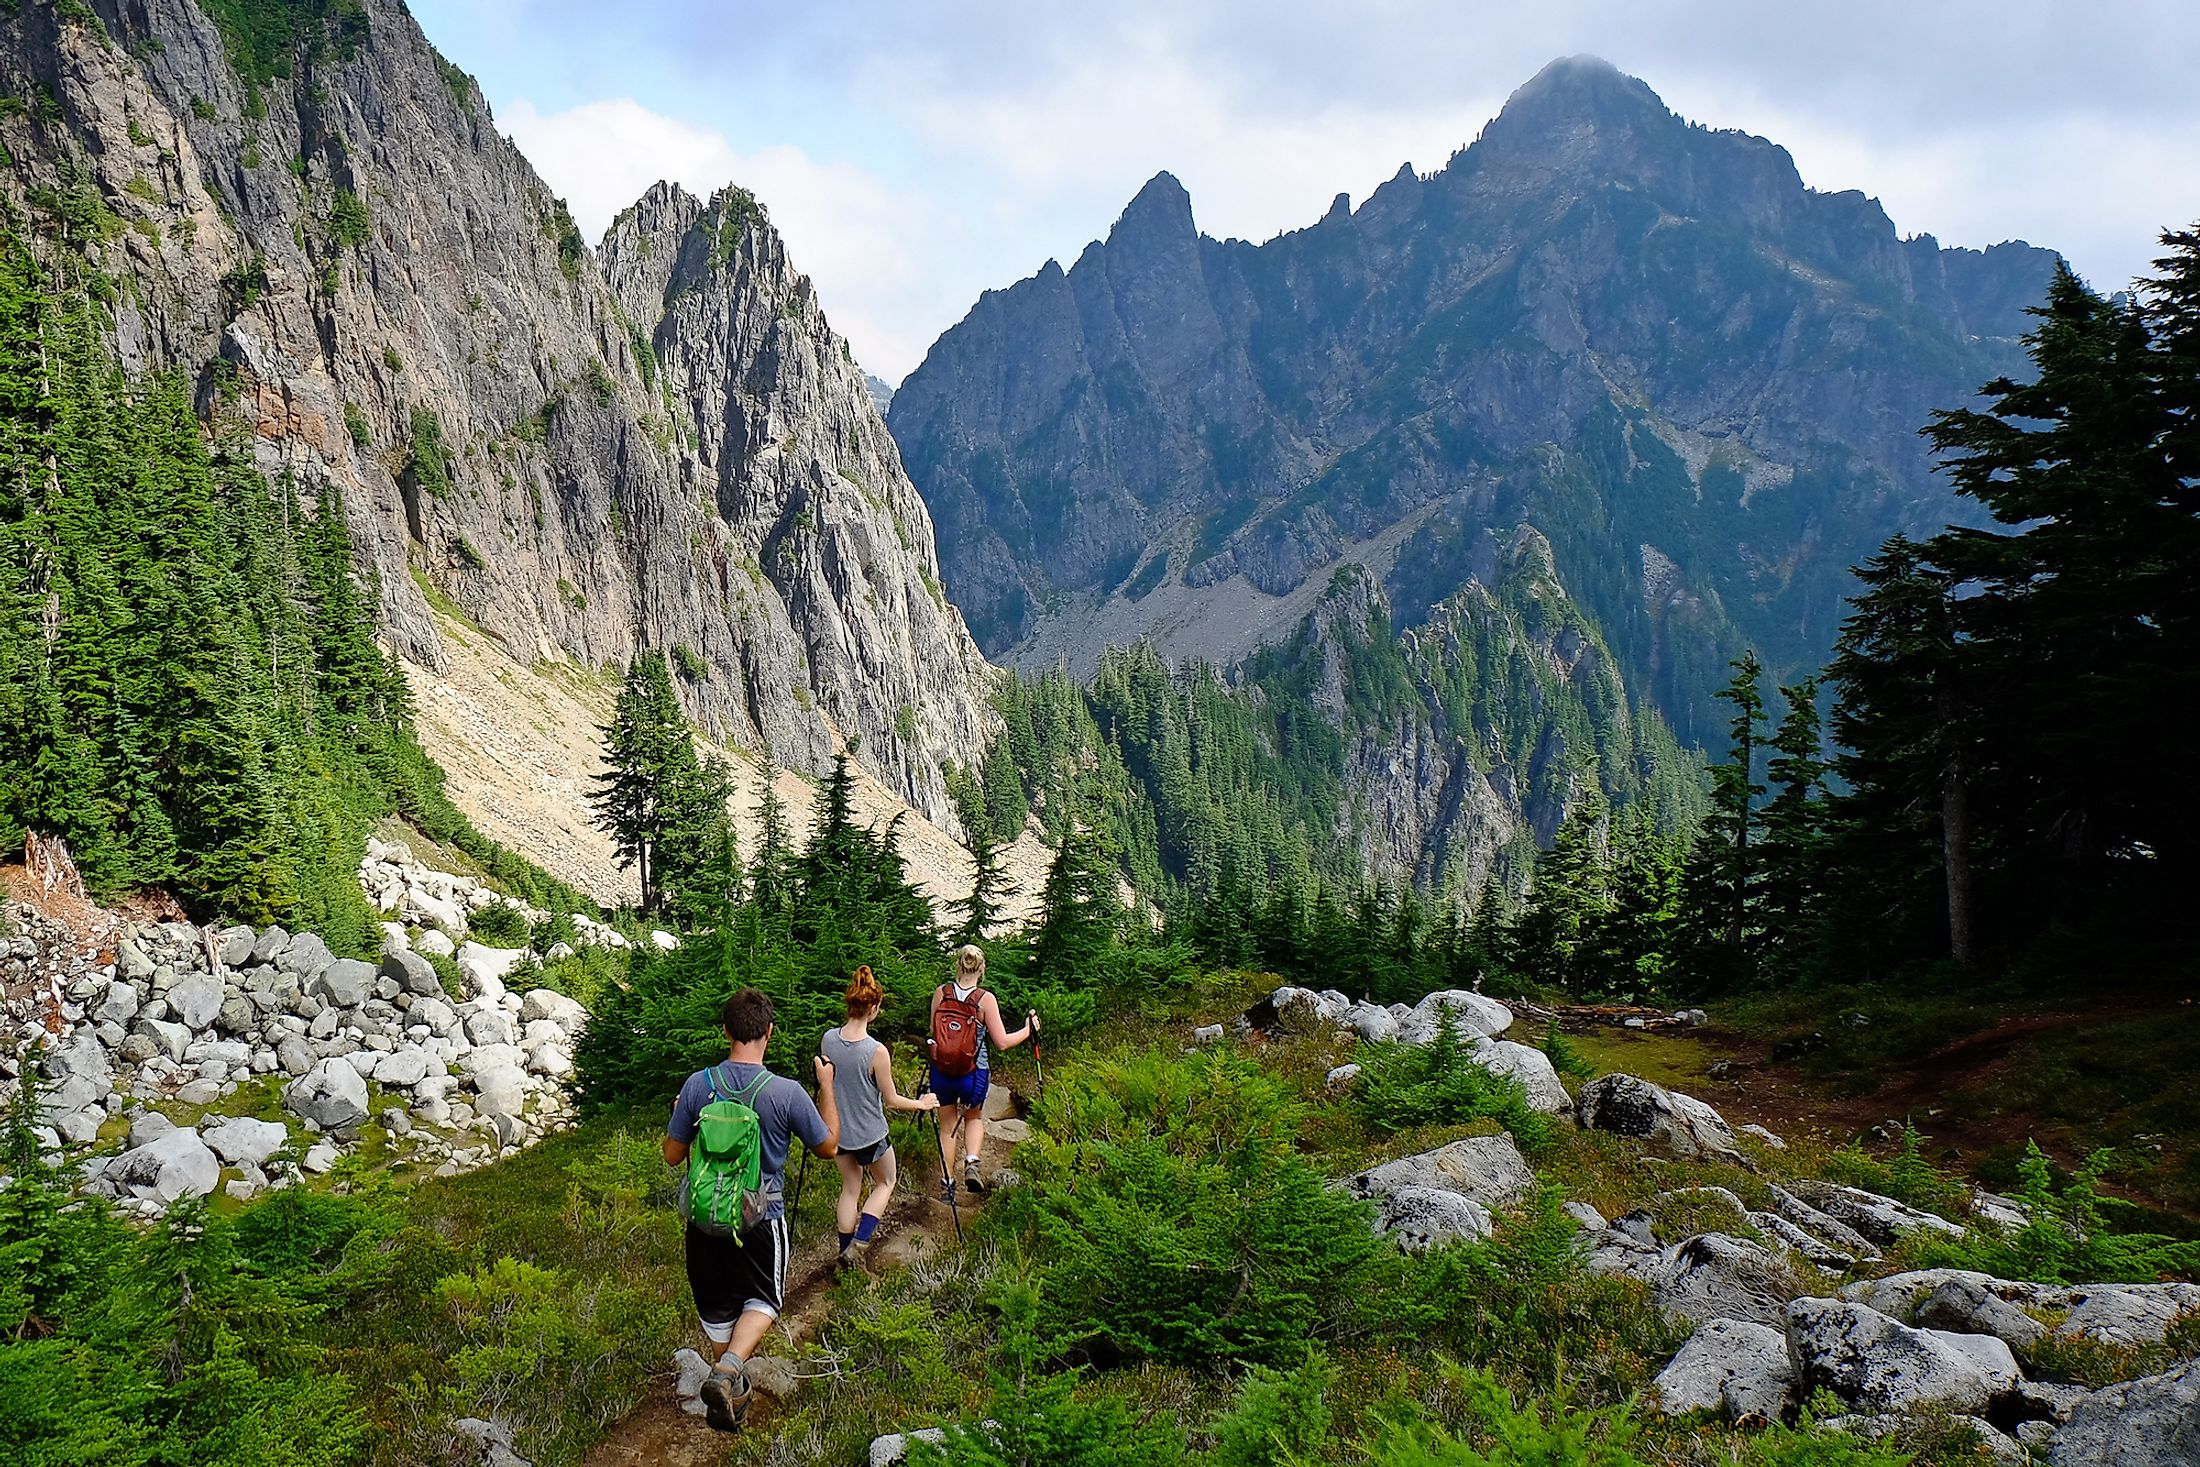 Three Hikers on the Pacific Crest Trail in the Cascade Mountains, North Cascades, Washington. 